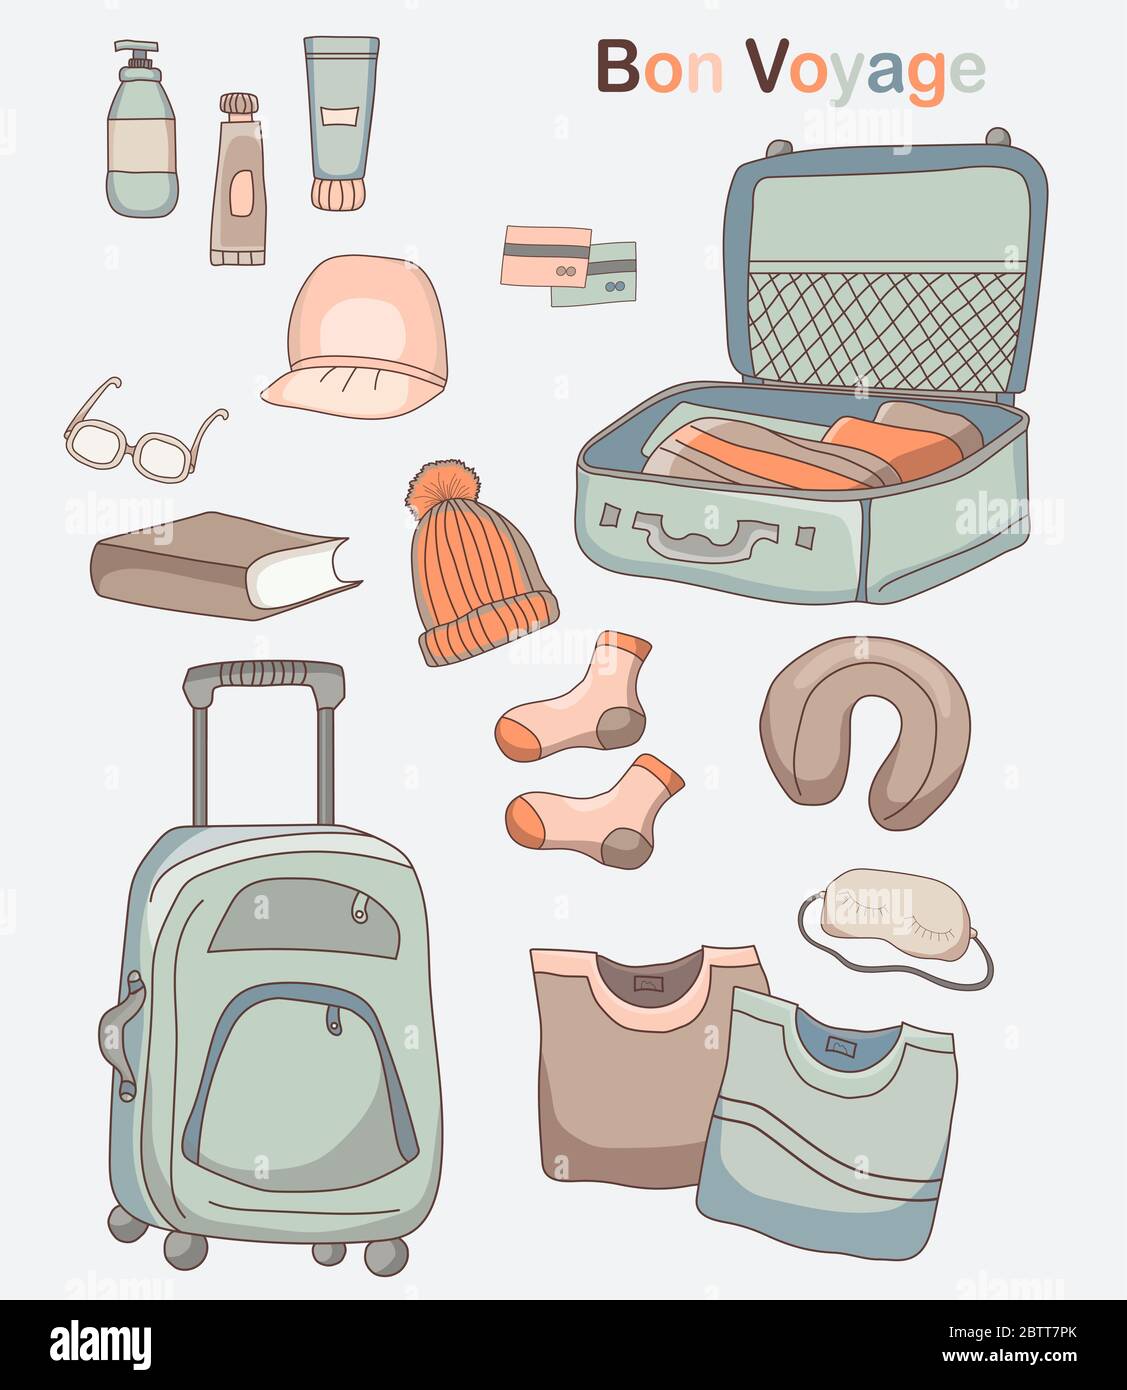 Set of vector pictures of luggage, clothes and things for travel on vacation. Bon voyage. Stock Vector